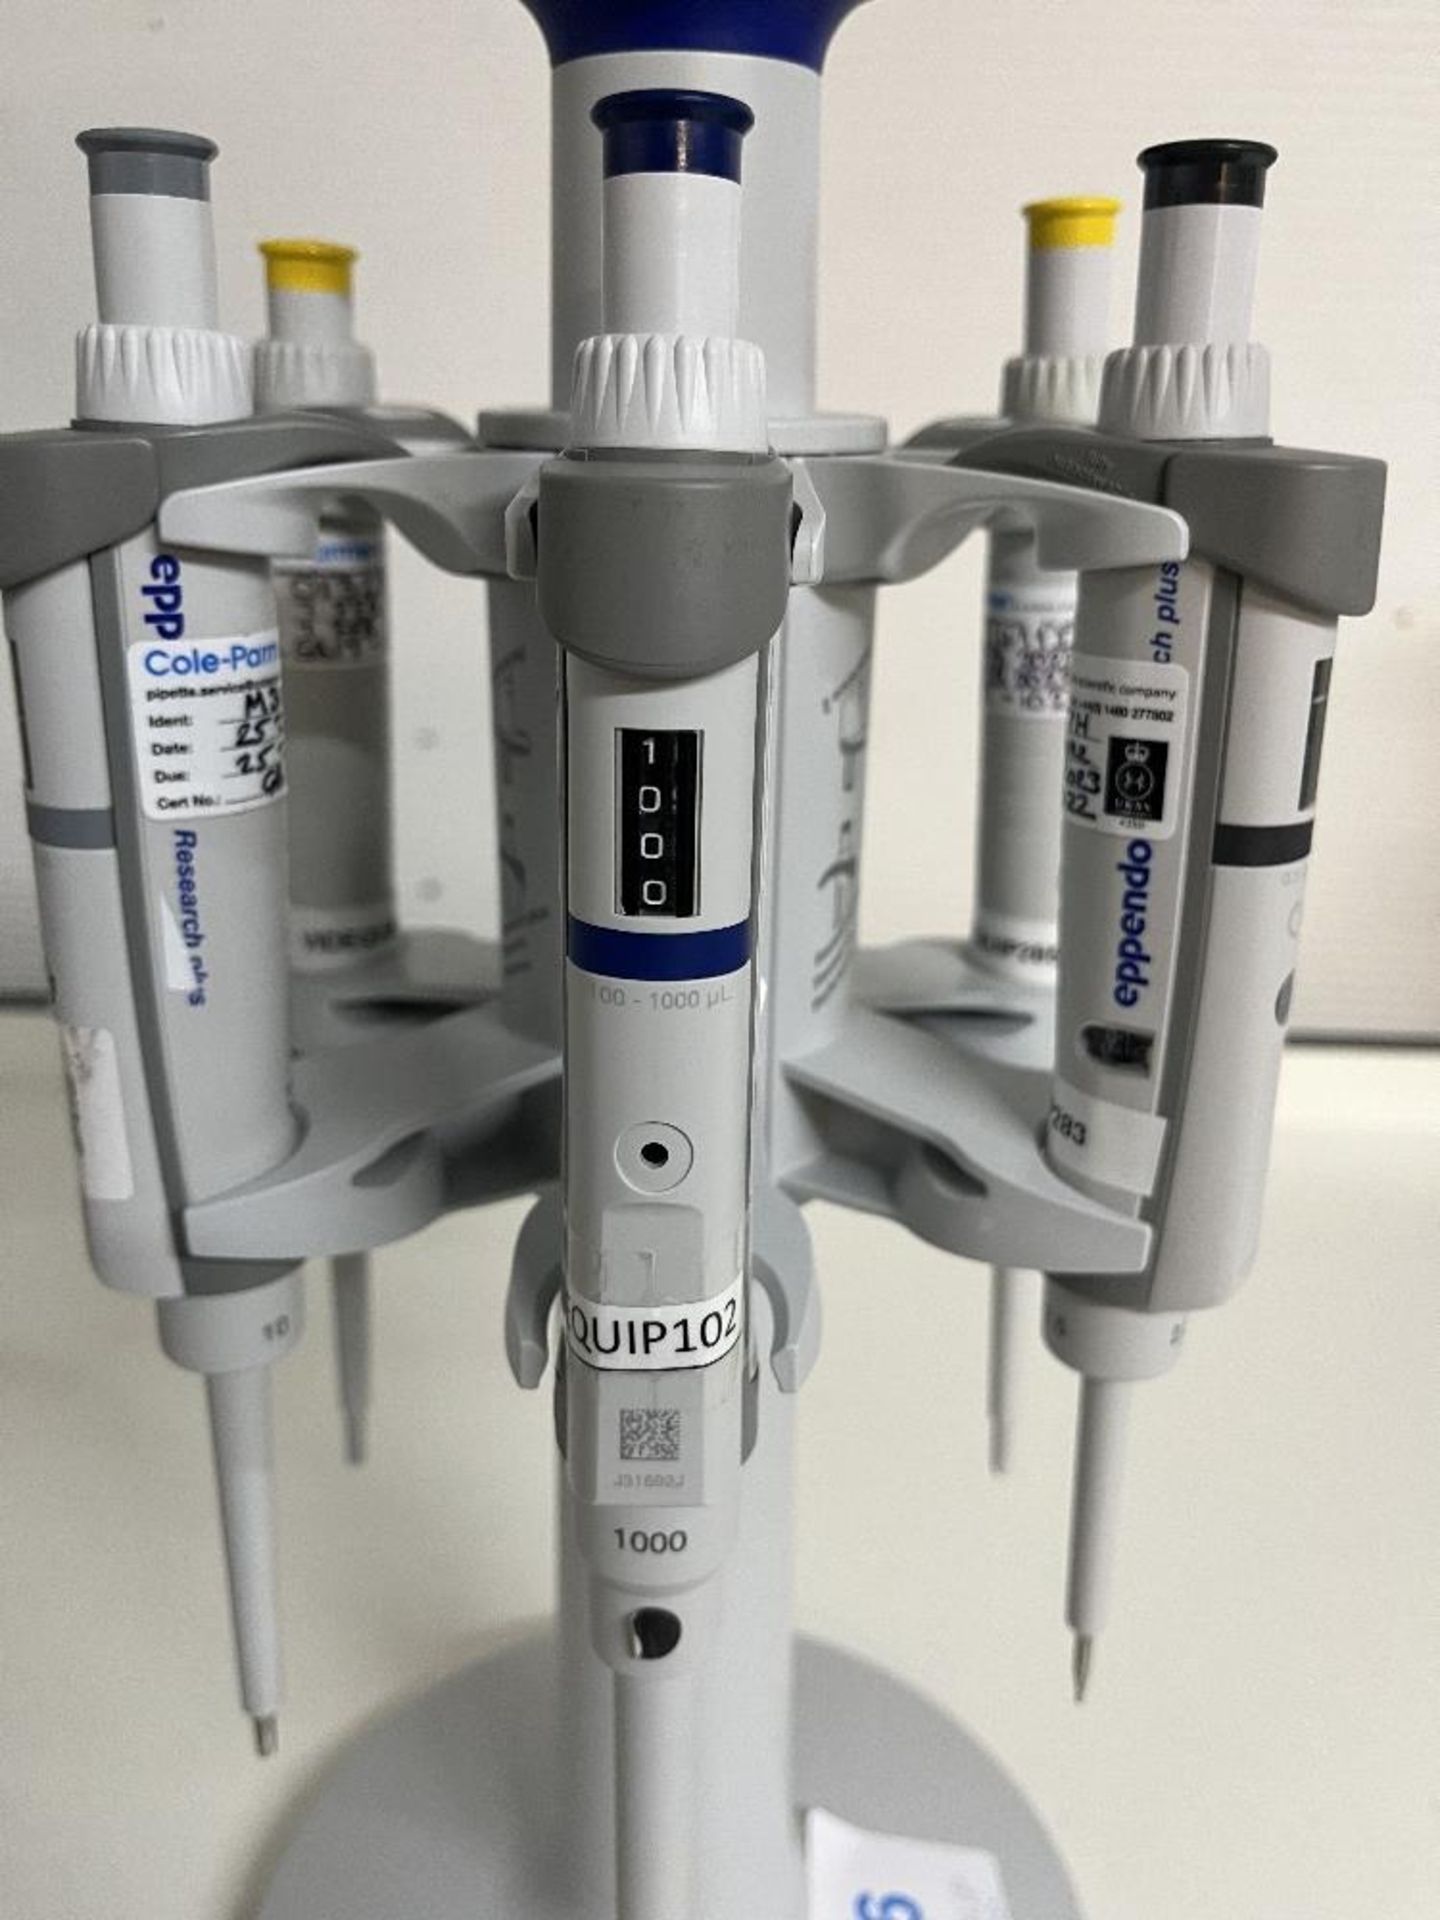 Eppendorf Pipette Carousel 2 with (6) Adjustable Volume Pipettes - Image 3 of 8